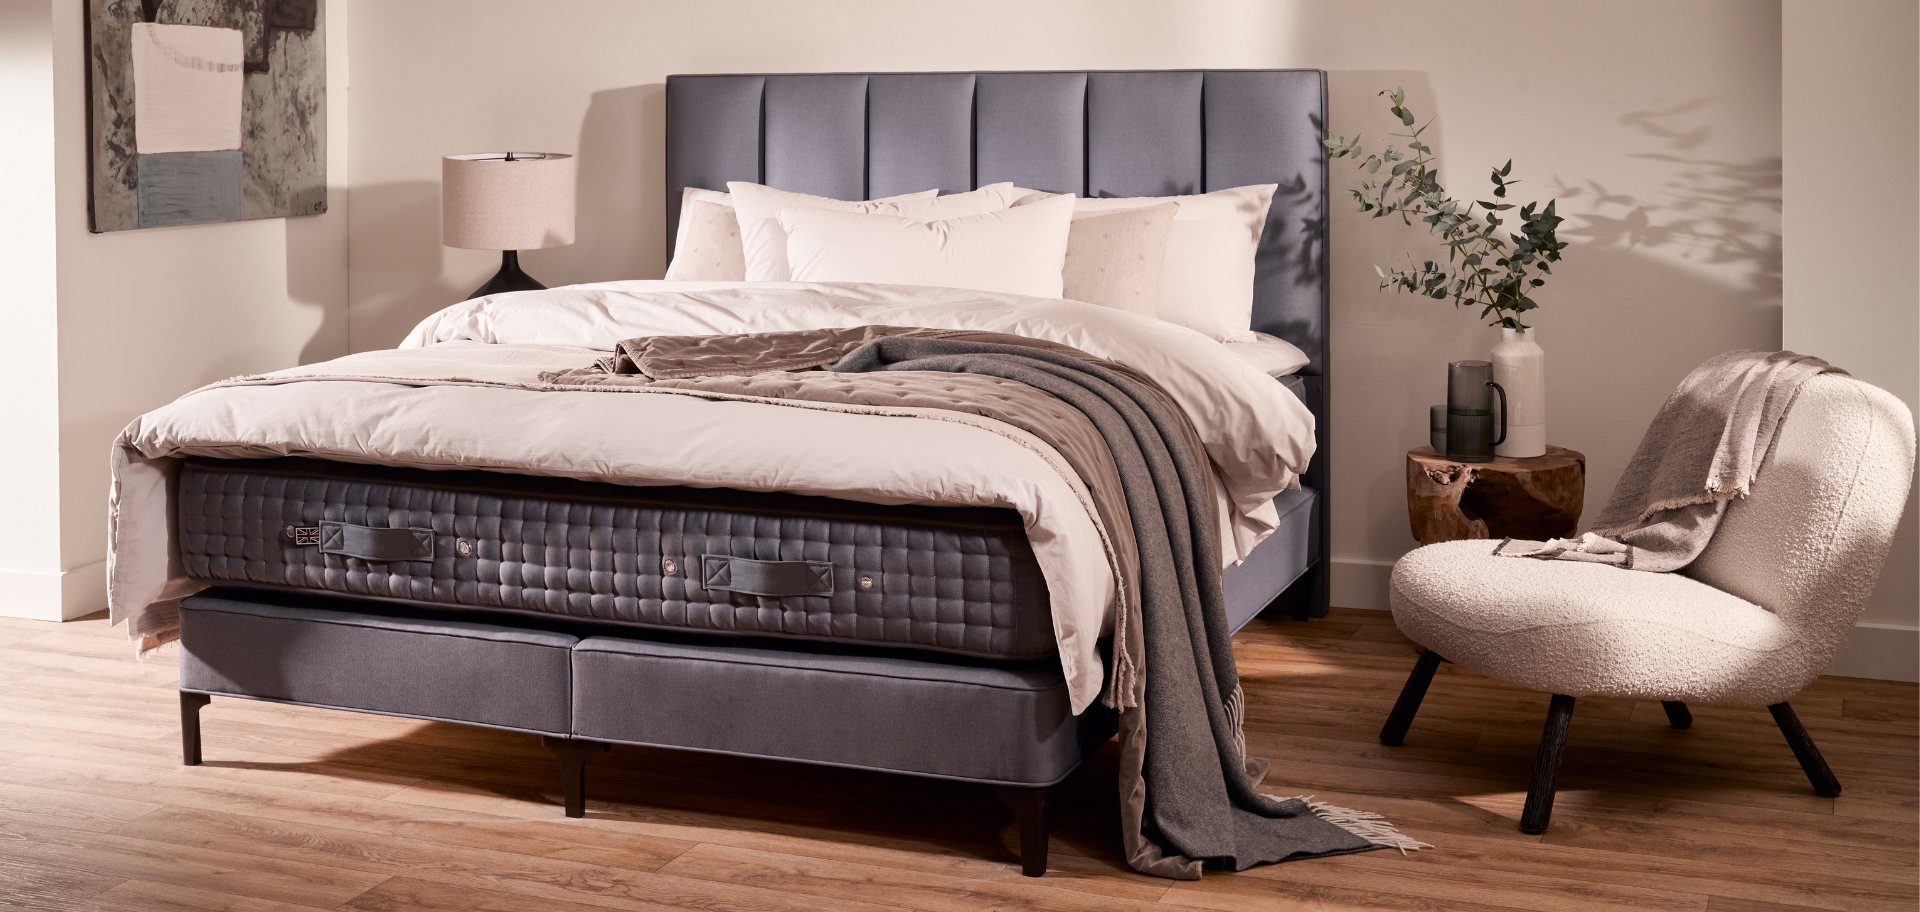 Save 20% on Vispring, the makers of Luxury Handmade British Beds